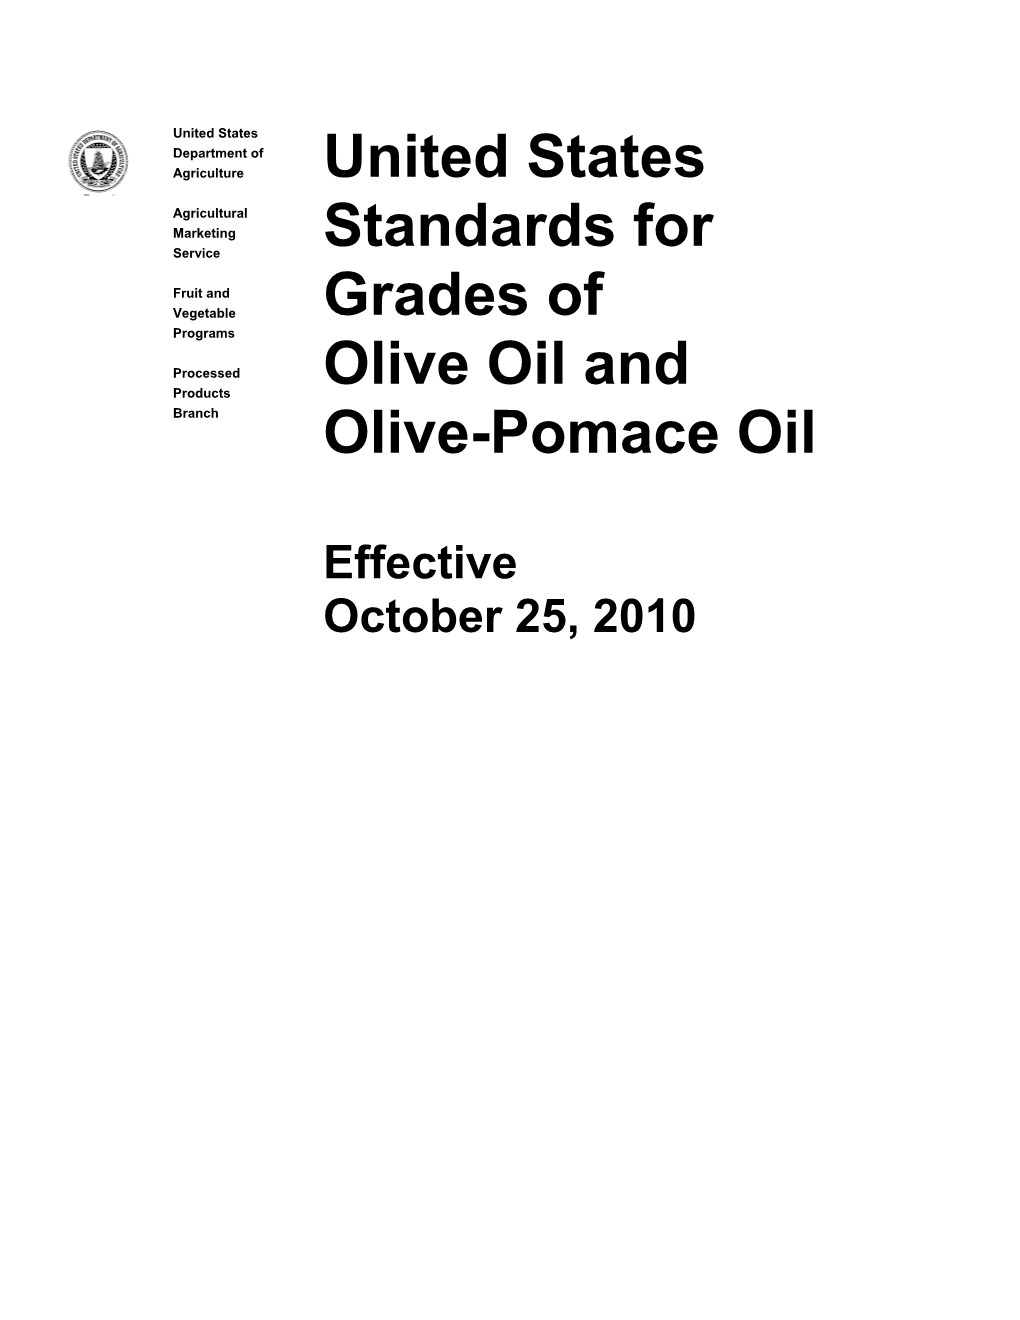 United States Standards for Grades of Olive Oil and Olive-Pomace